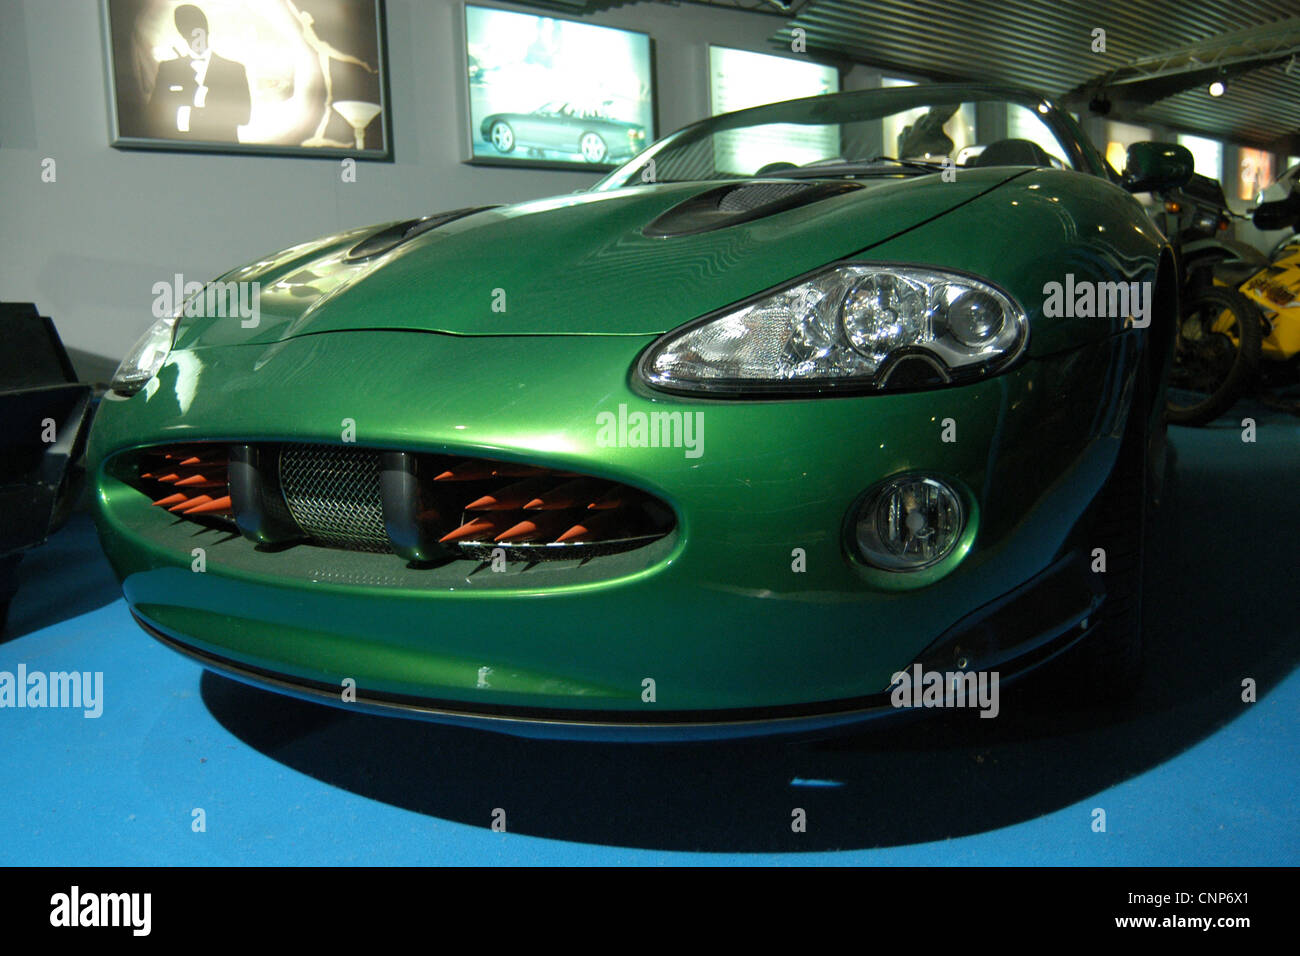 Jaguar XKR Roadster used by James Bond in the film Die Another Day ...